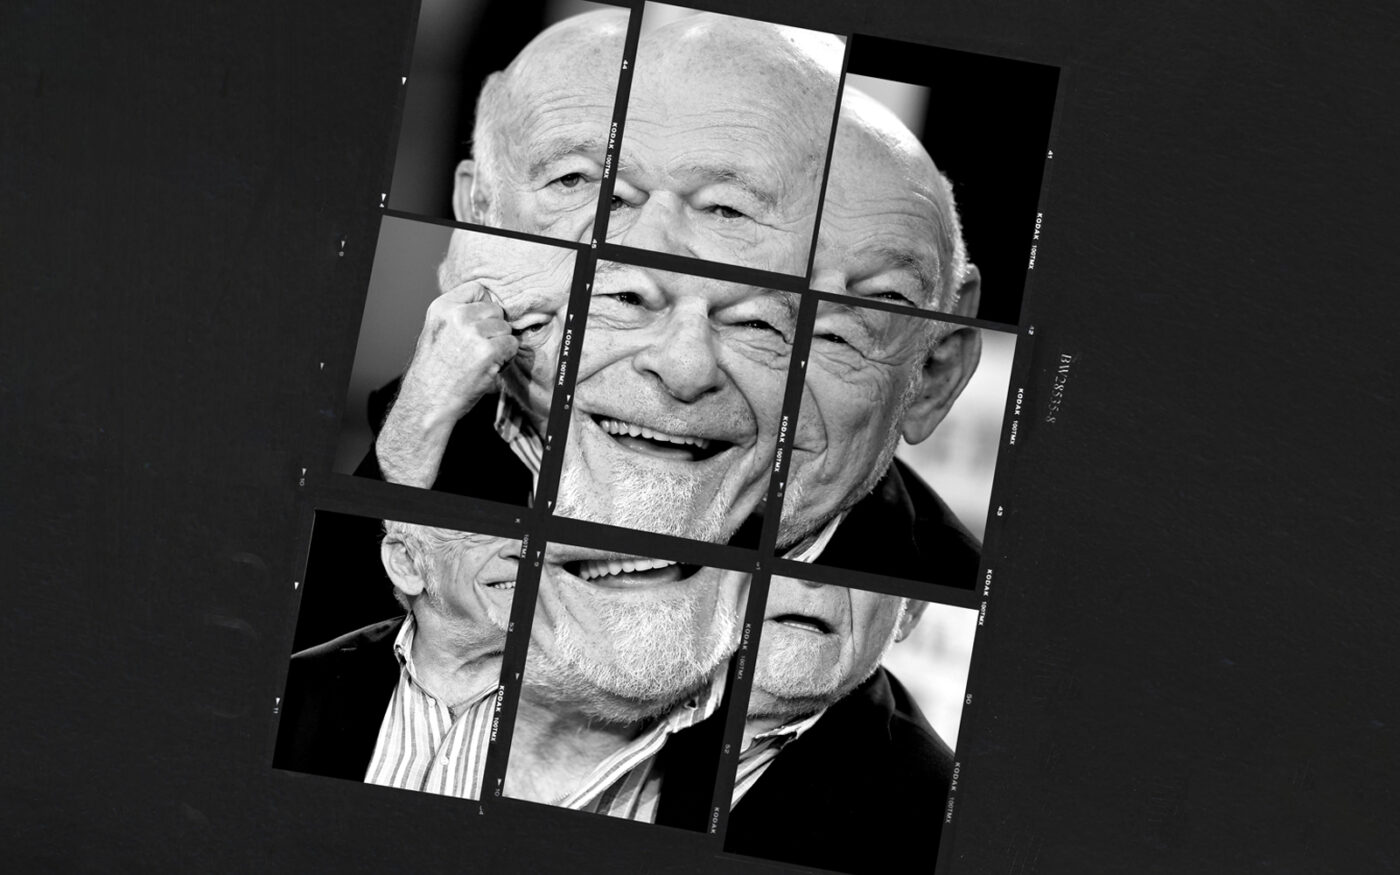 Sam Zell (Photo-illustration by Paul Dilakian/The Real Deal, photos via Getty Images; Playboy cover via Wikimedia Commons)